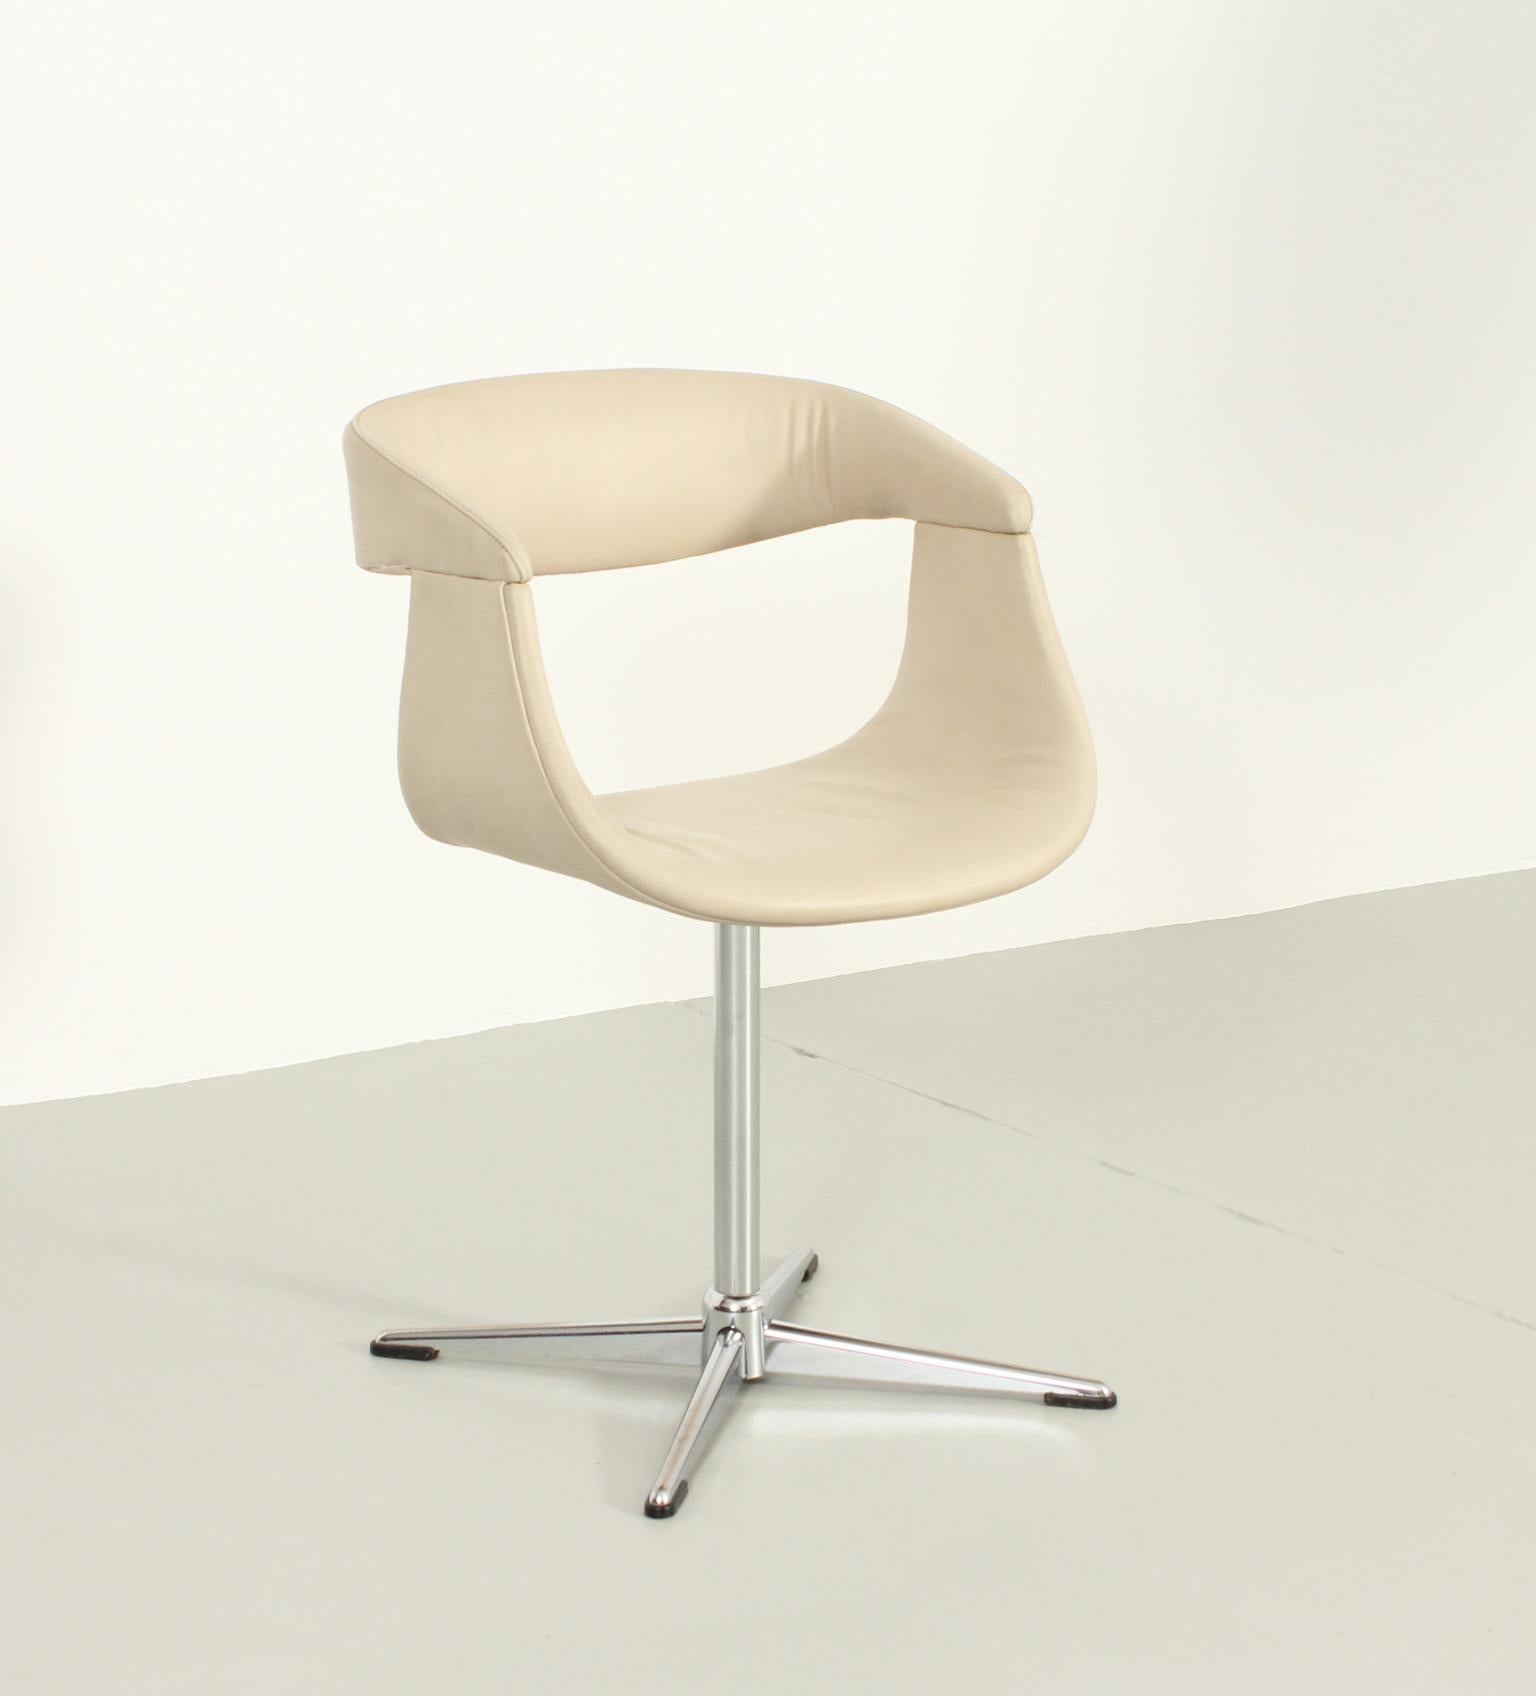 Office swivel chair from 1960's, France. Upholstered in cream leather and chromed metal base.